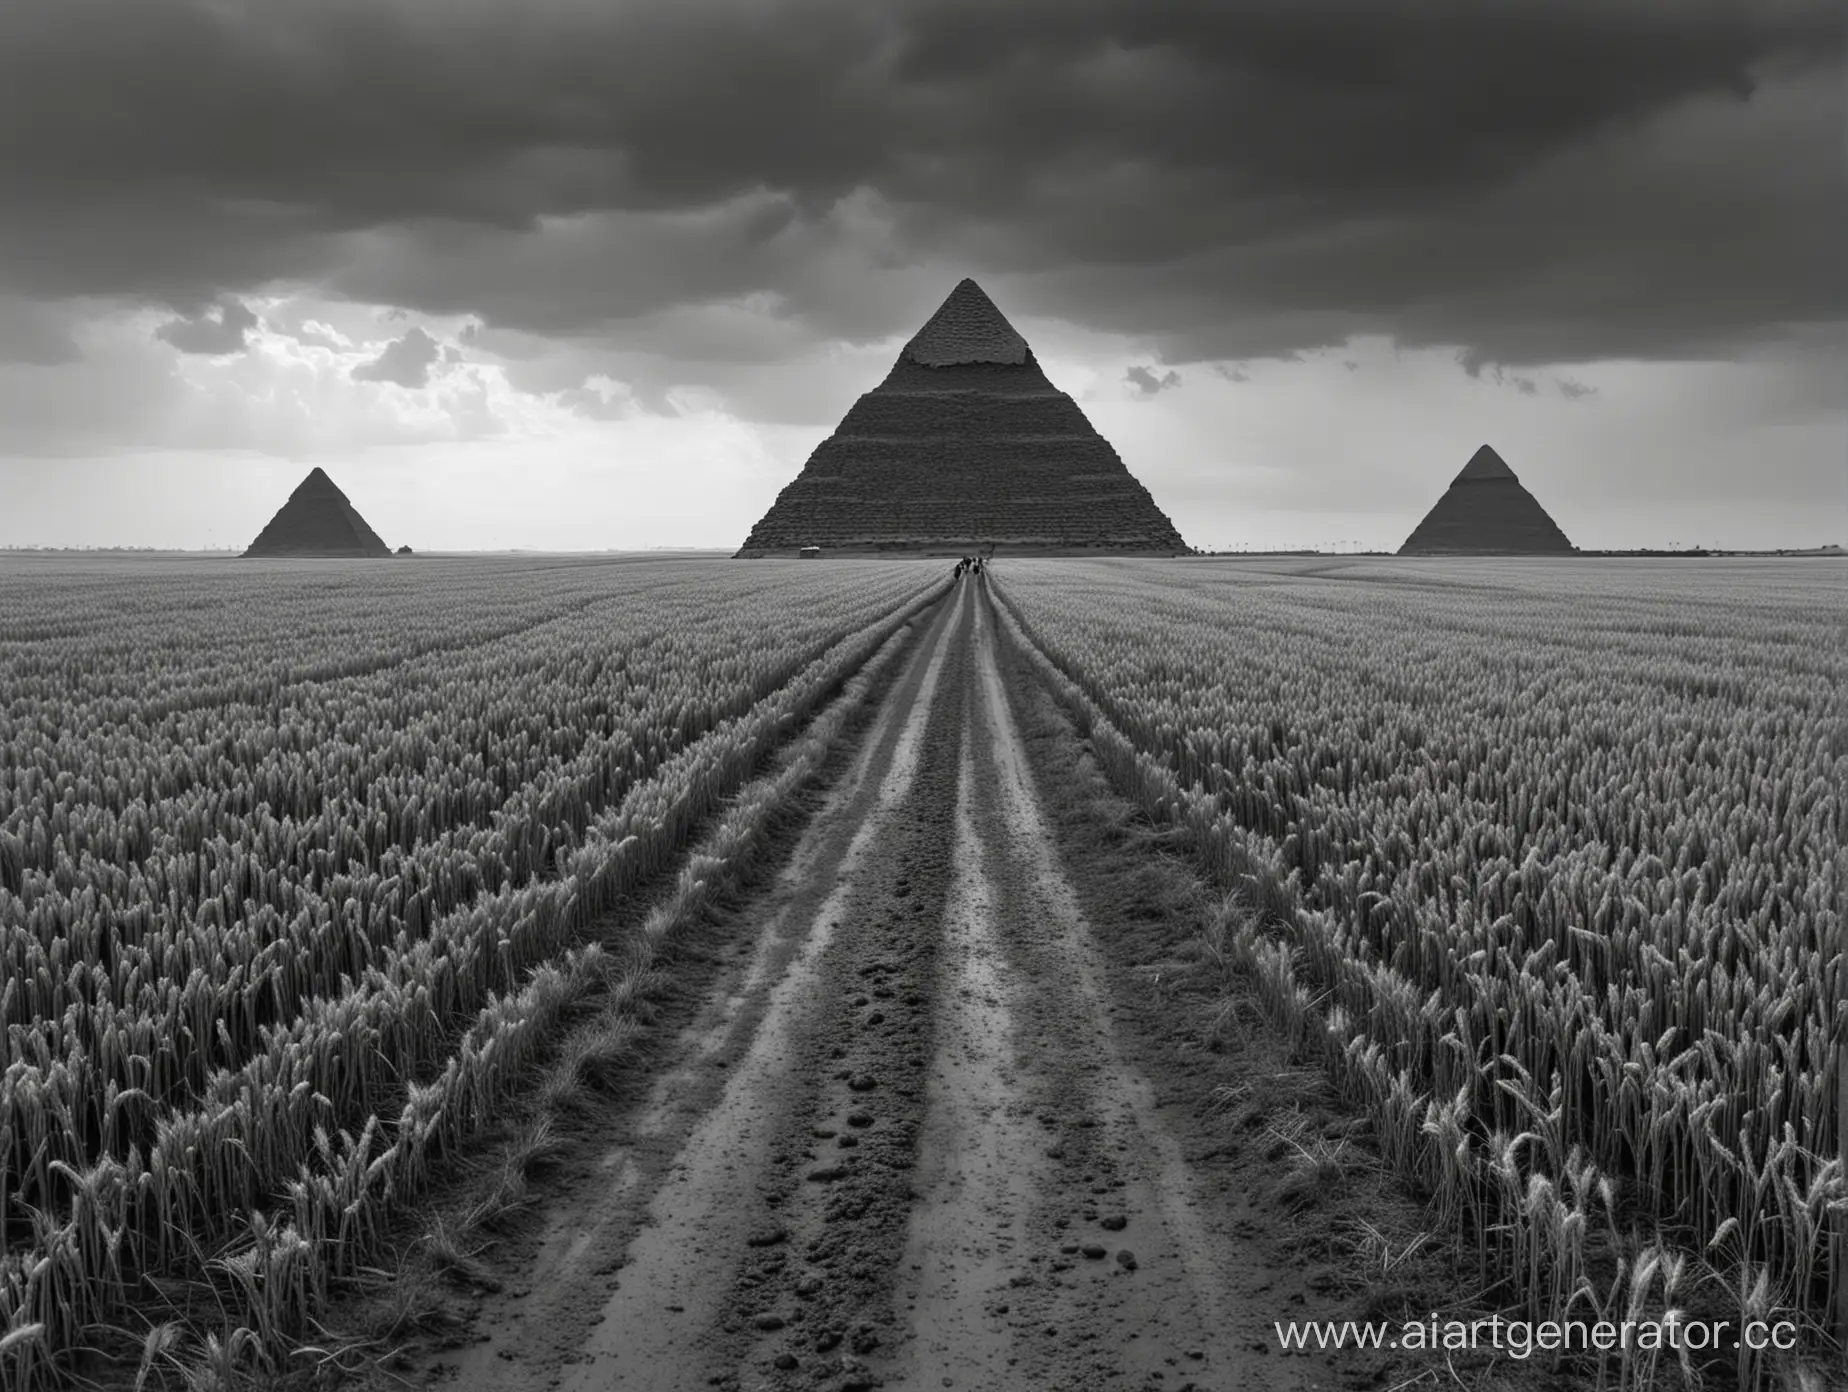 Mysterious-Encounter-People-Seeking-Refuge-in-Wheat-Field-as-Black-Pyramids-Hover